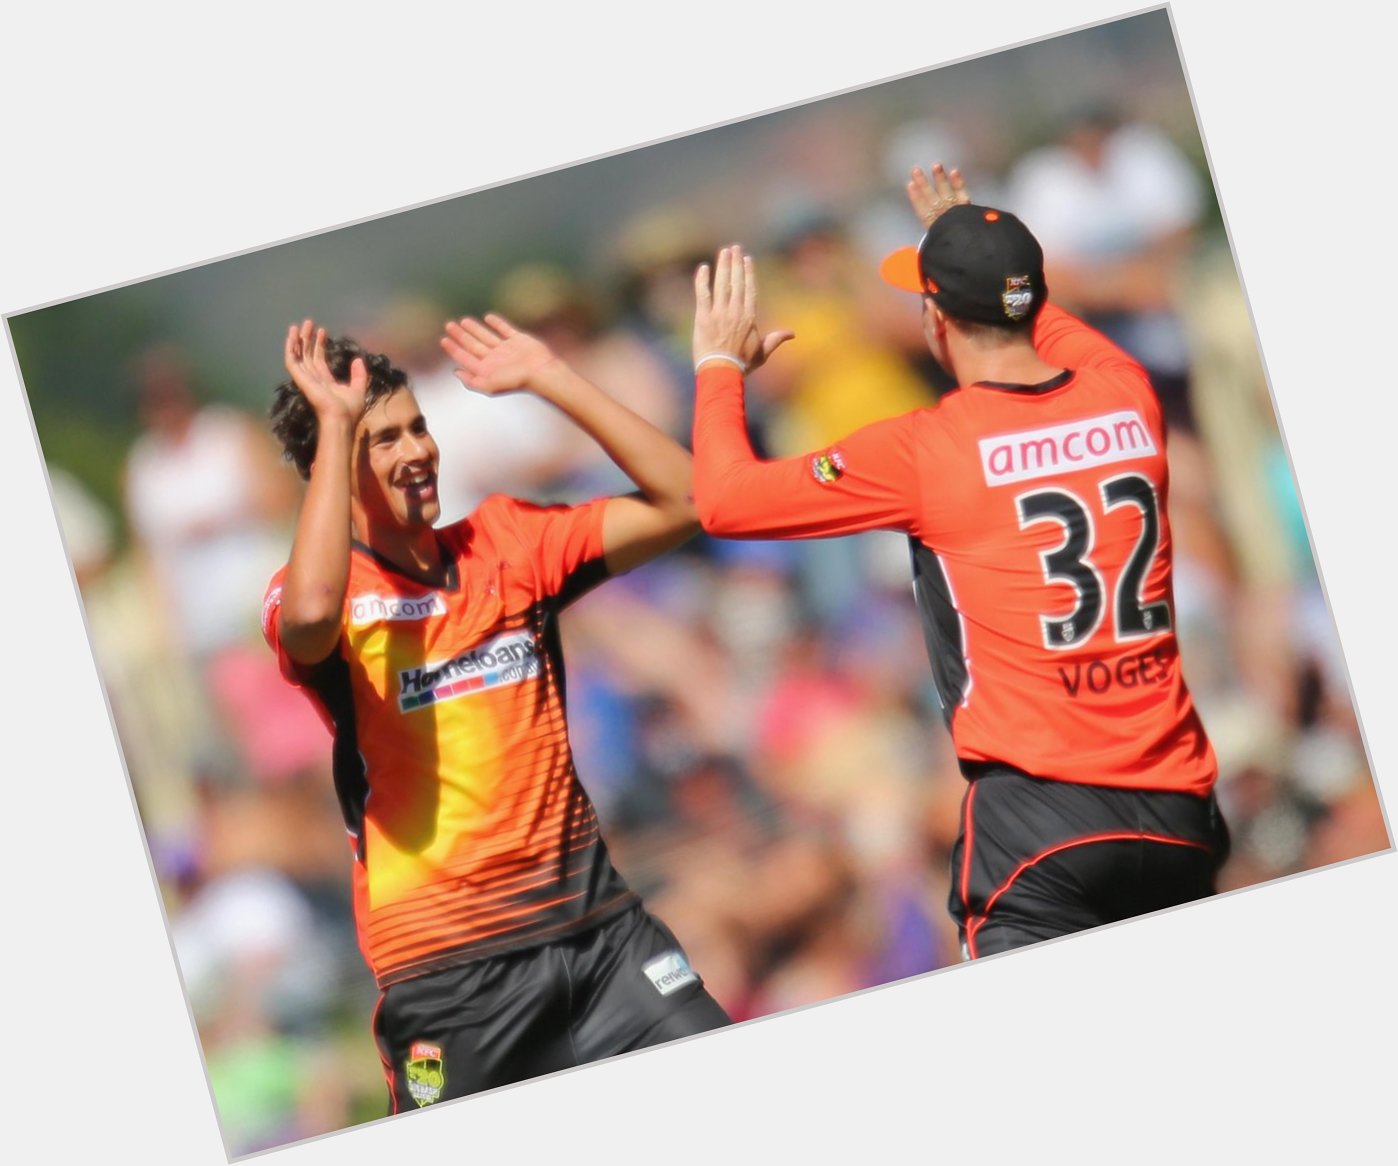 HIGH FIVES! Join us in wishing a happy birthday to Scorchers spinner Ashton Agar who turns 22 today!!! 